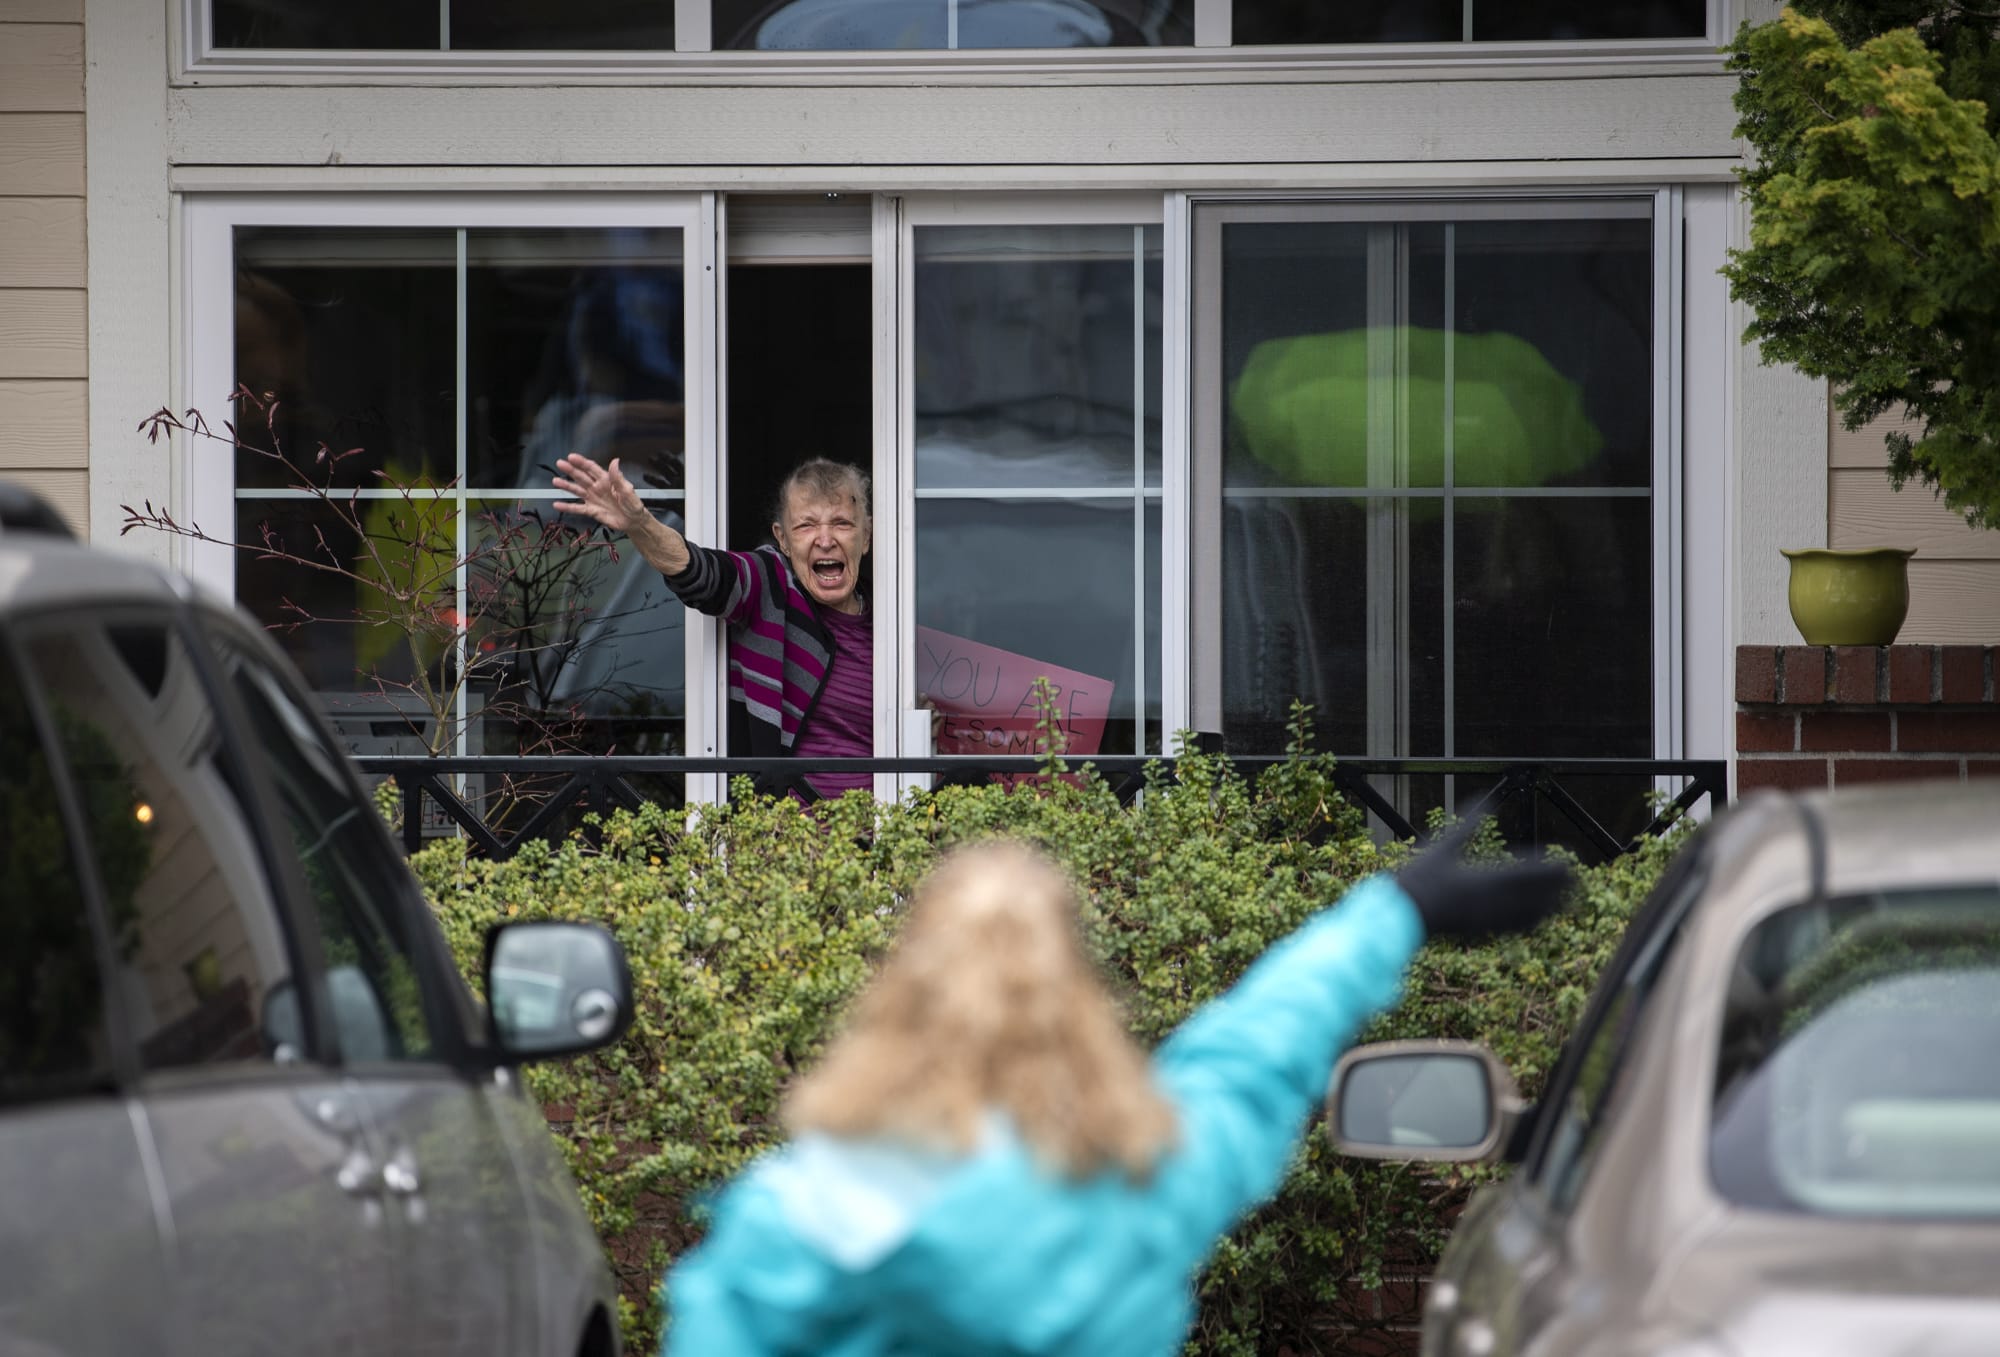 Touchmark resident Gladys Meier waves at staff members as an outdoor parade moves by her window through the parking lot at the senior living community in Vancouver on Thursday.